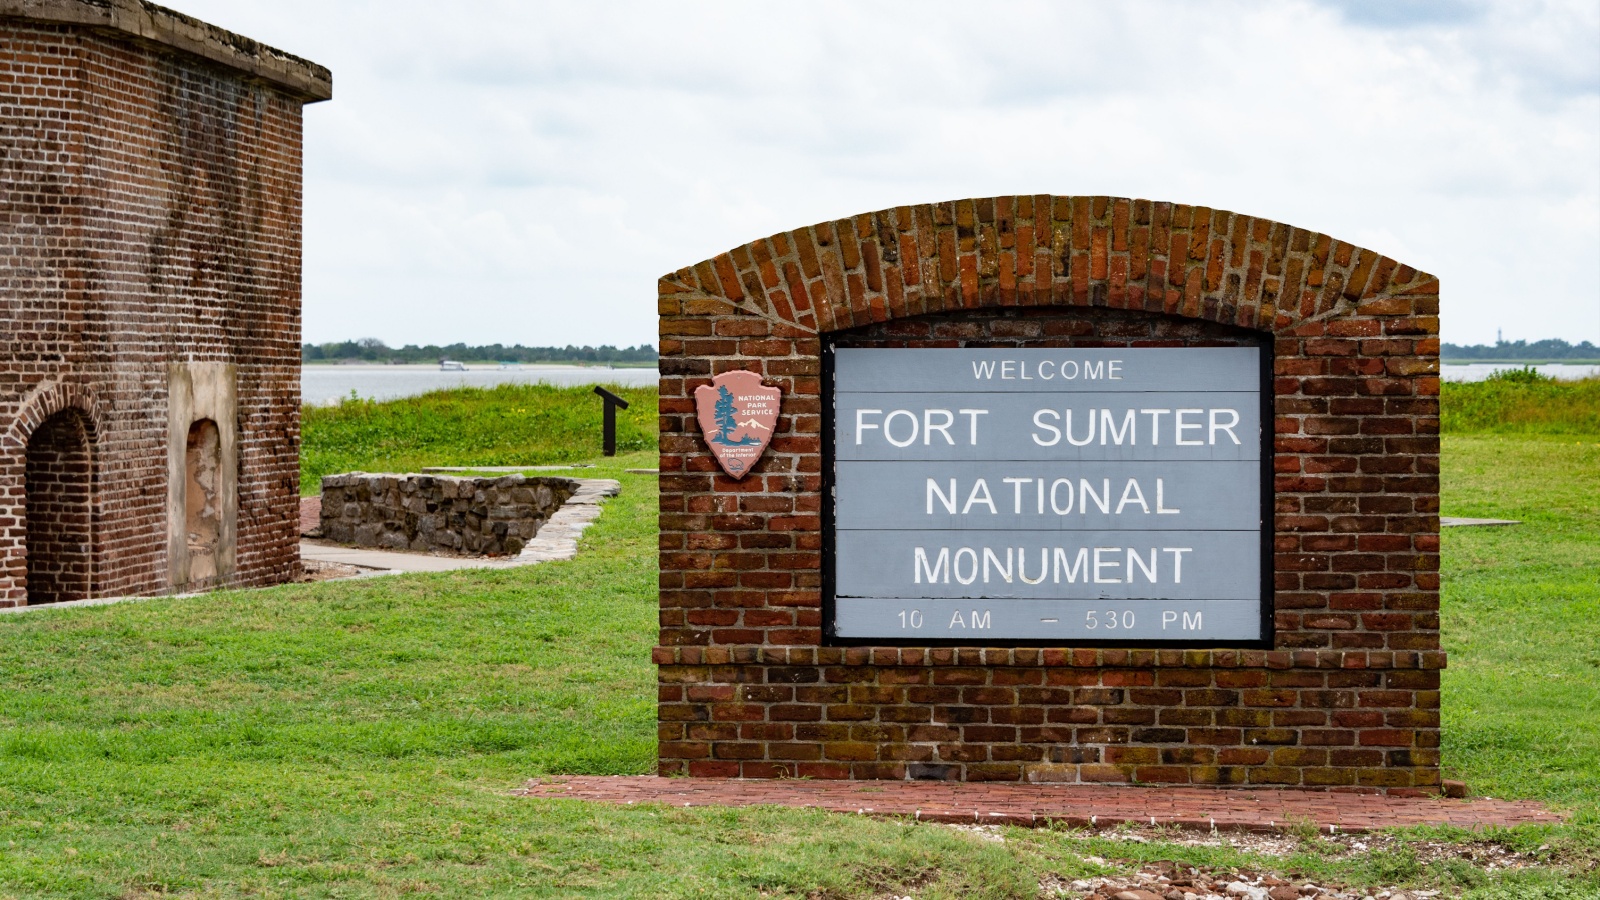 image credit: Chris Allan/Shutterstock <p>Fort Sumter is where the first shots of the Civil War were fired, igniting the conflict between North and South. Now accessible by ferry, the fort offers guided tours that detail its historic significance and the initial battle that took place. Visitors can explore the ruins and museum, which showcases artifacts and a detailed chronology of the fort’s role in the war.</p>